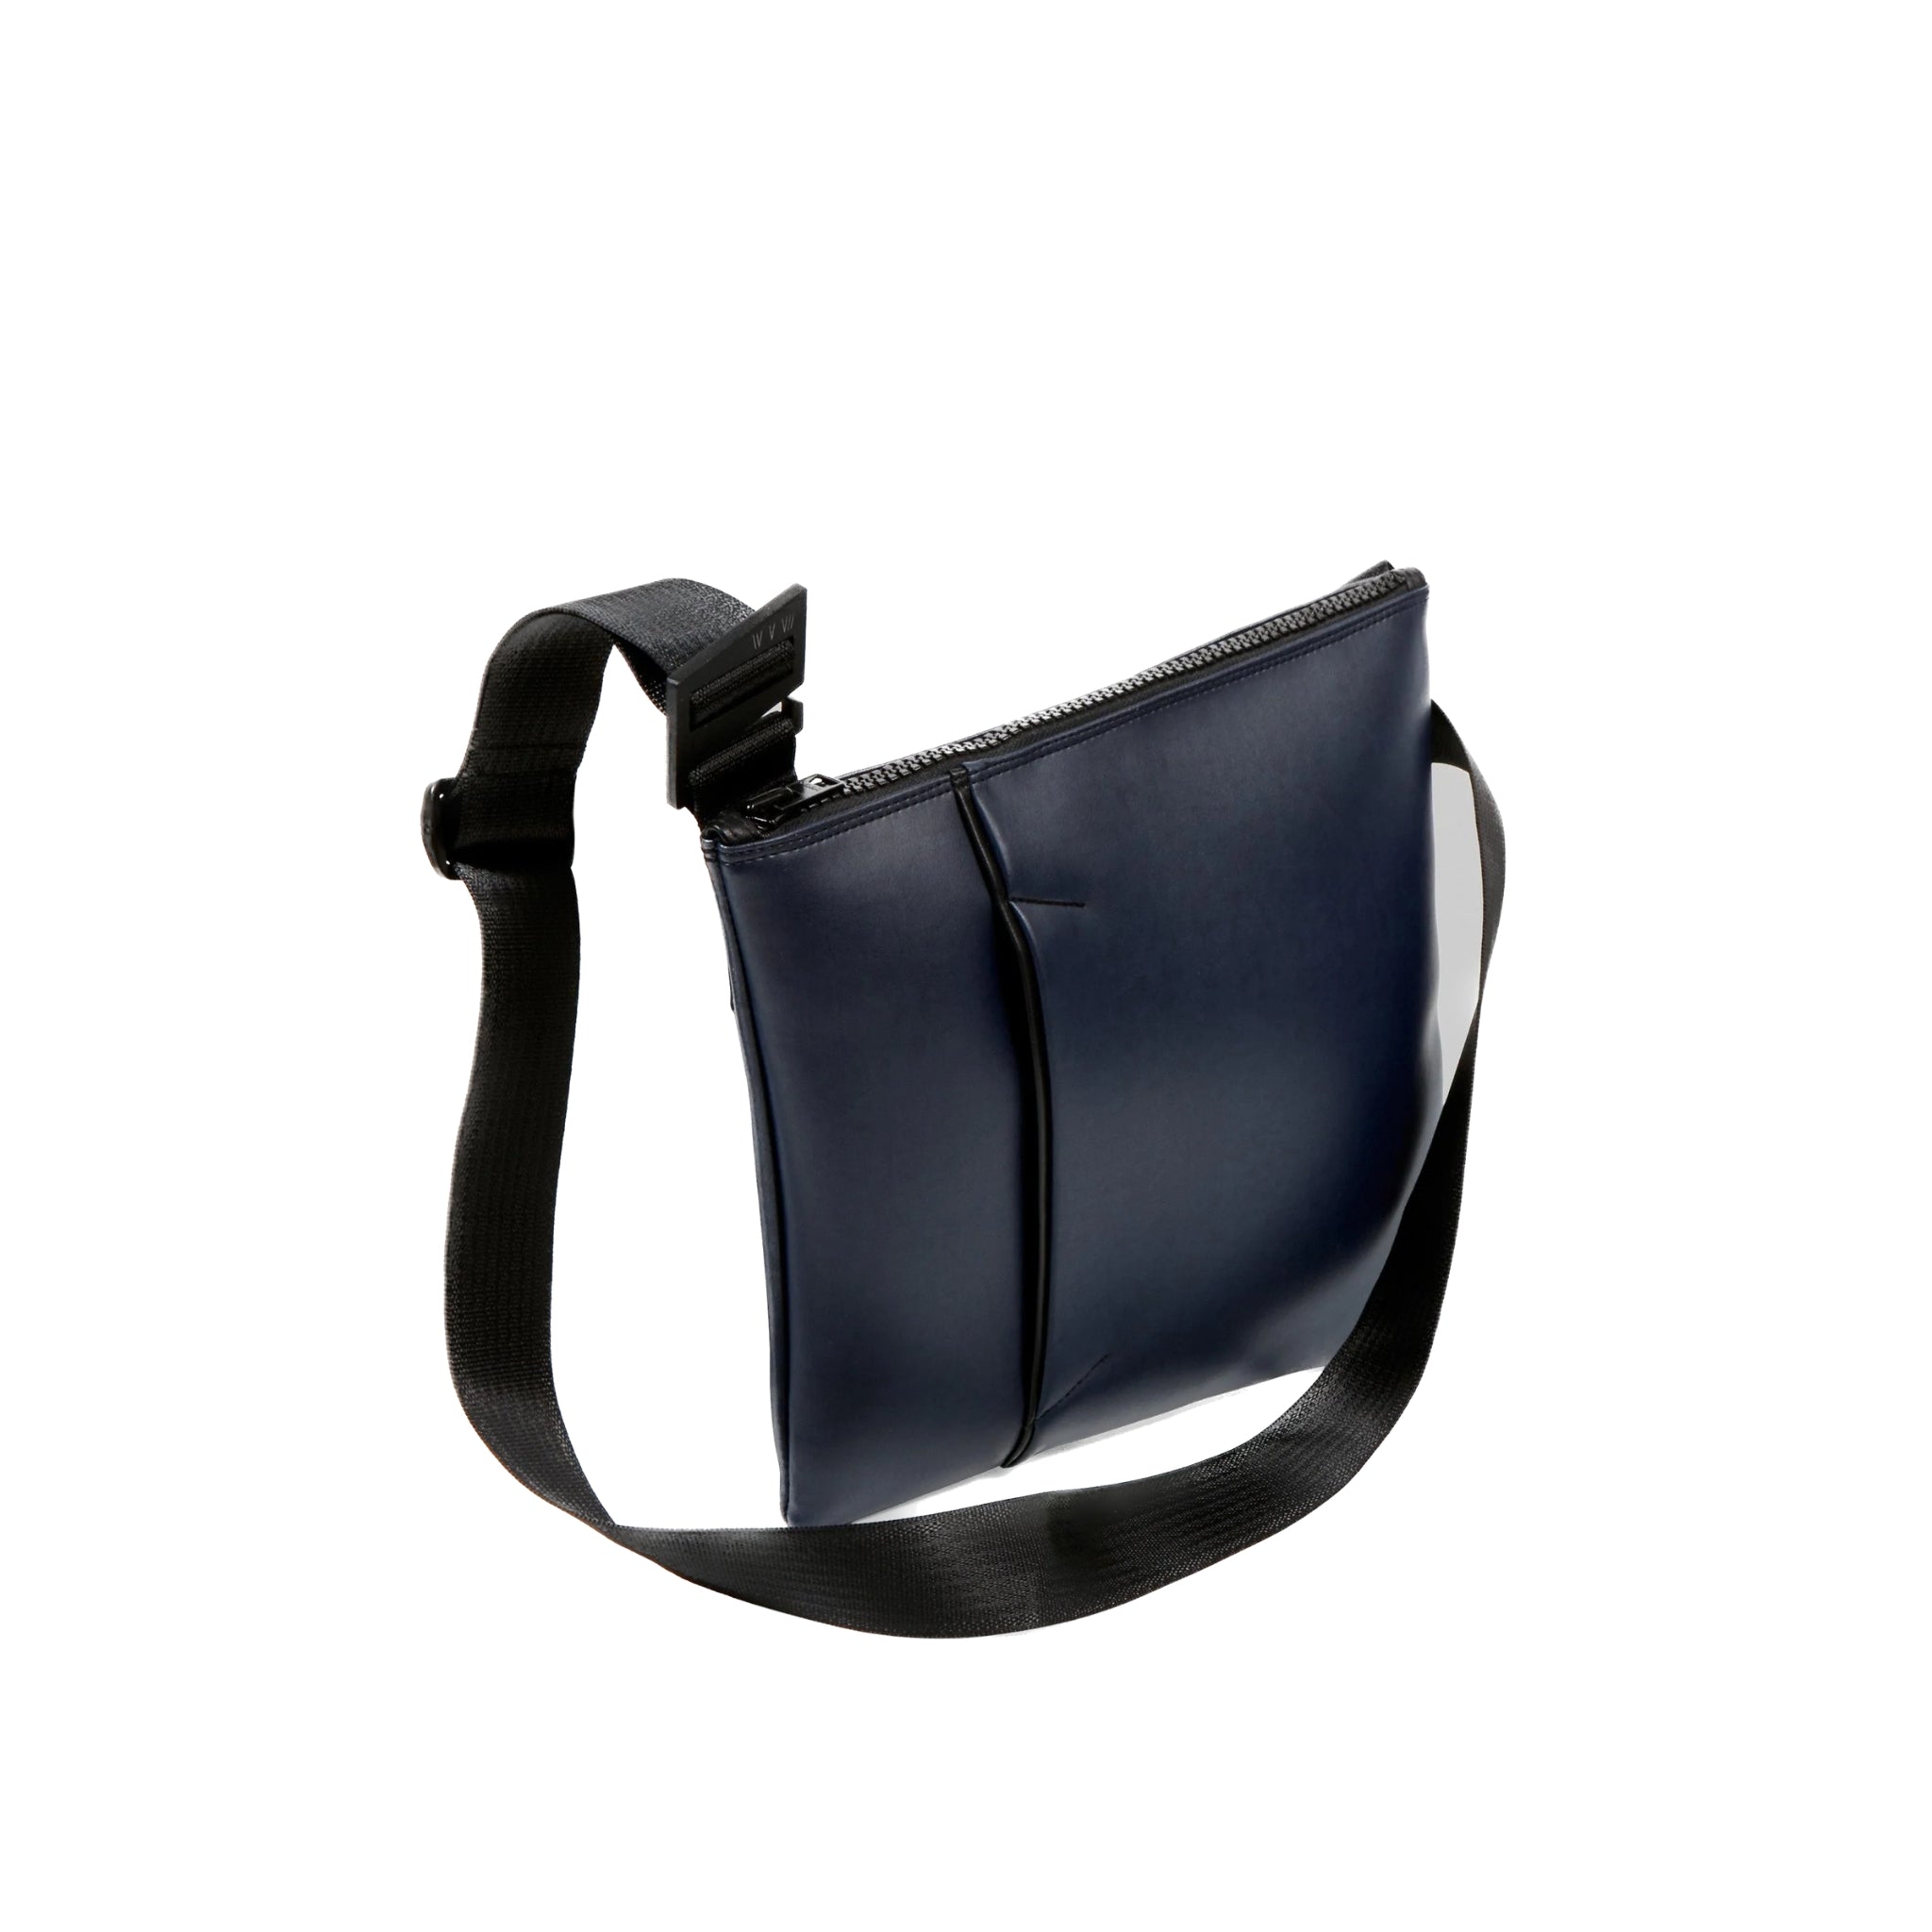 Another angle of the ANDO satchel in navy vegan leather (desserto). Product shown at the front/center of a white background